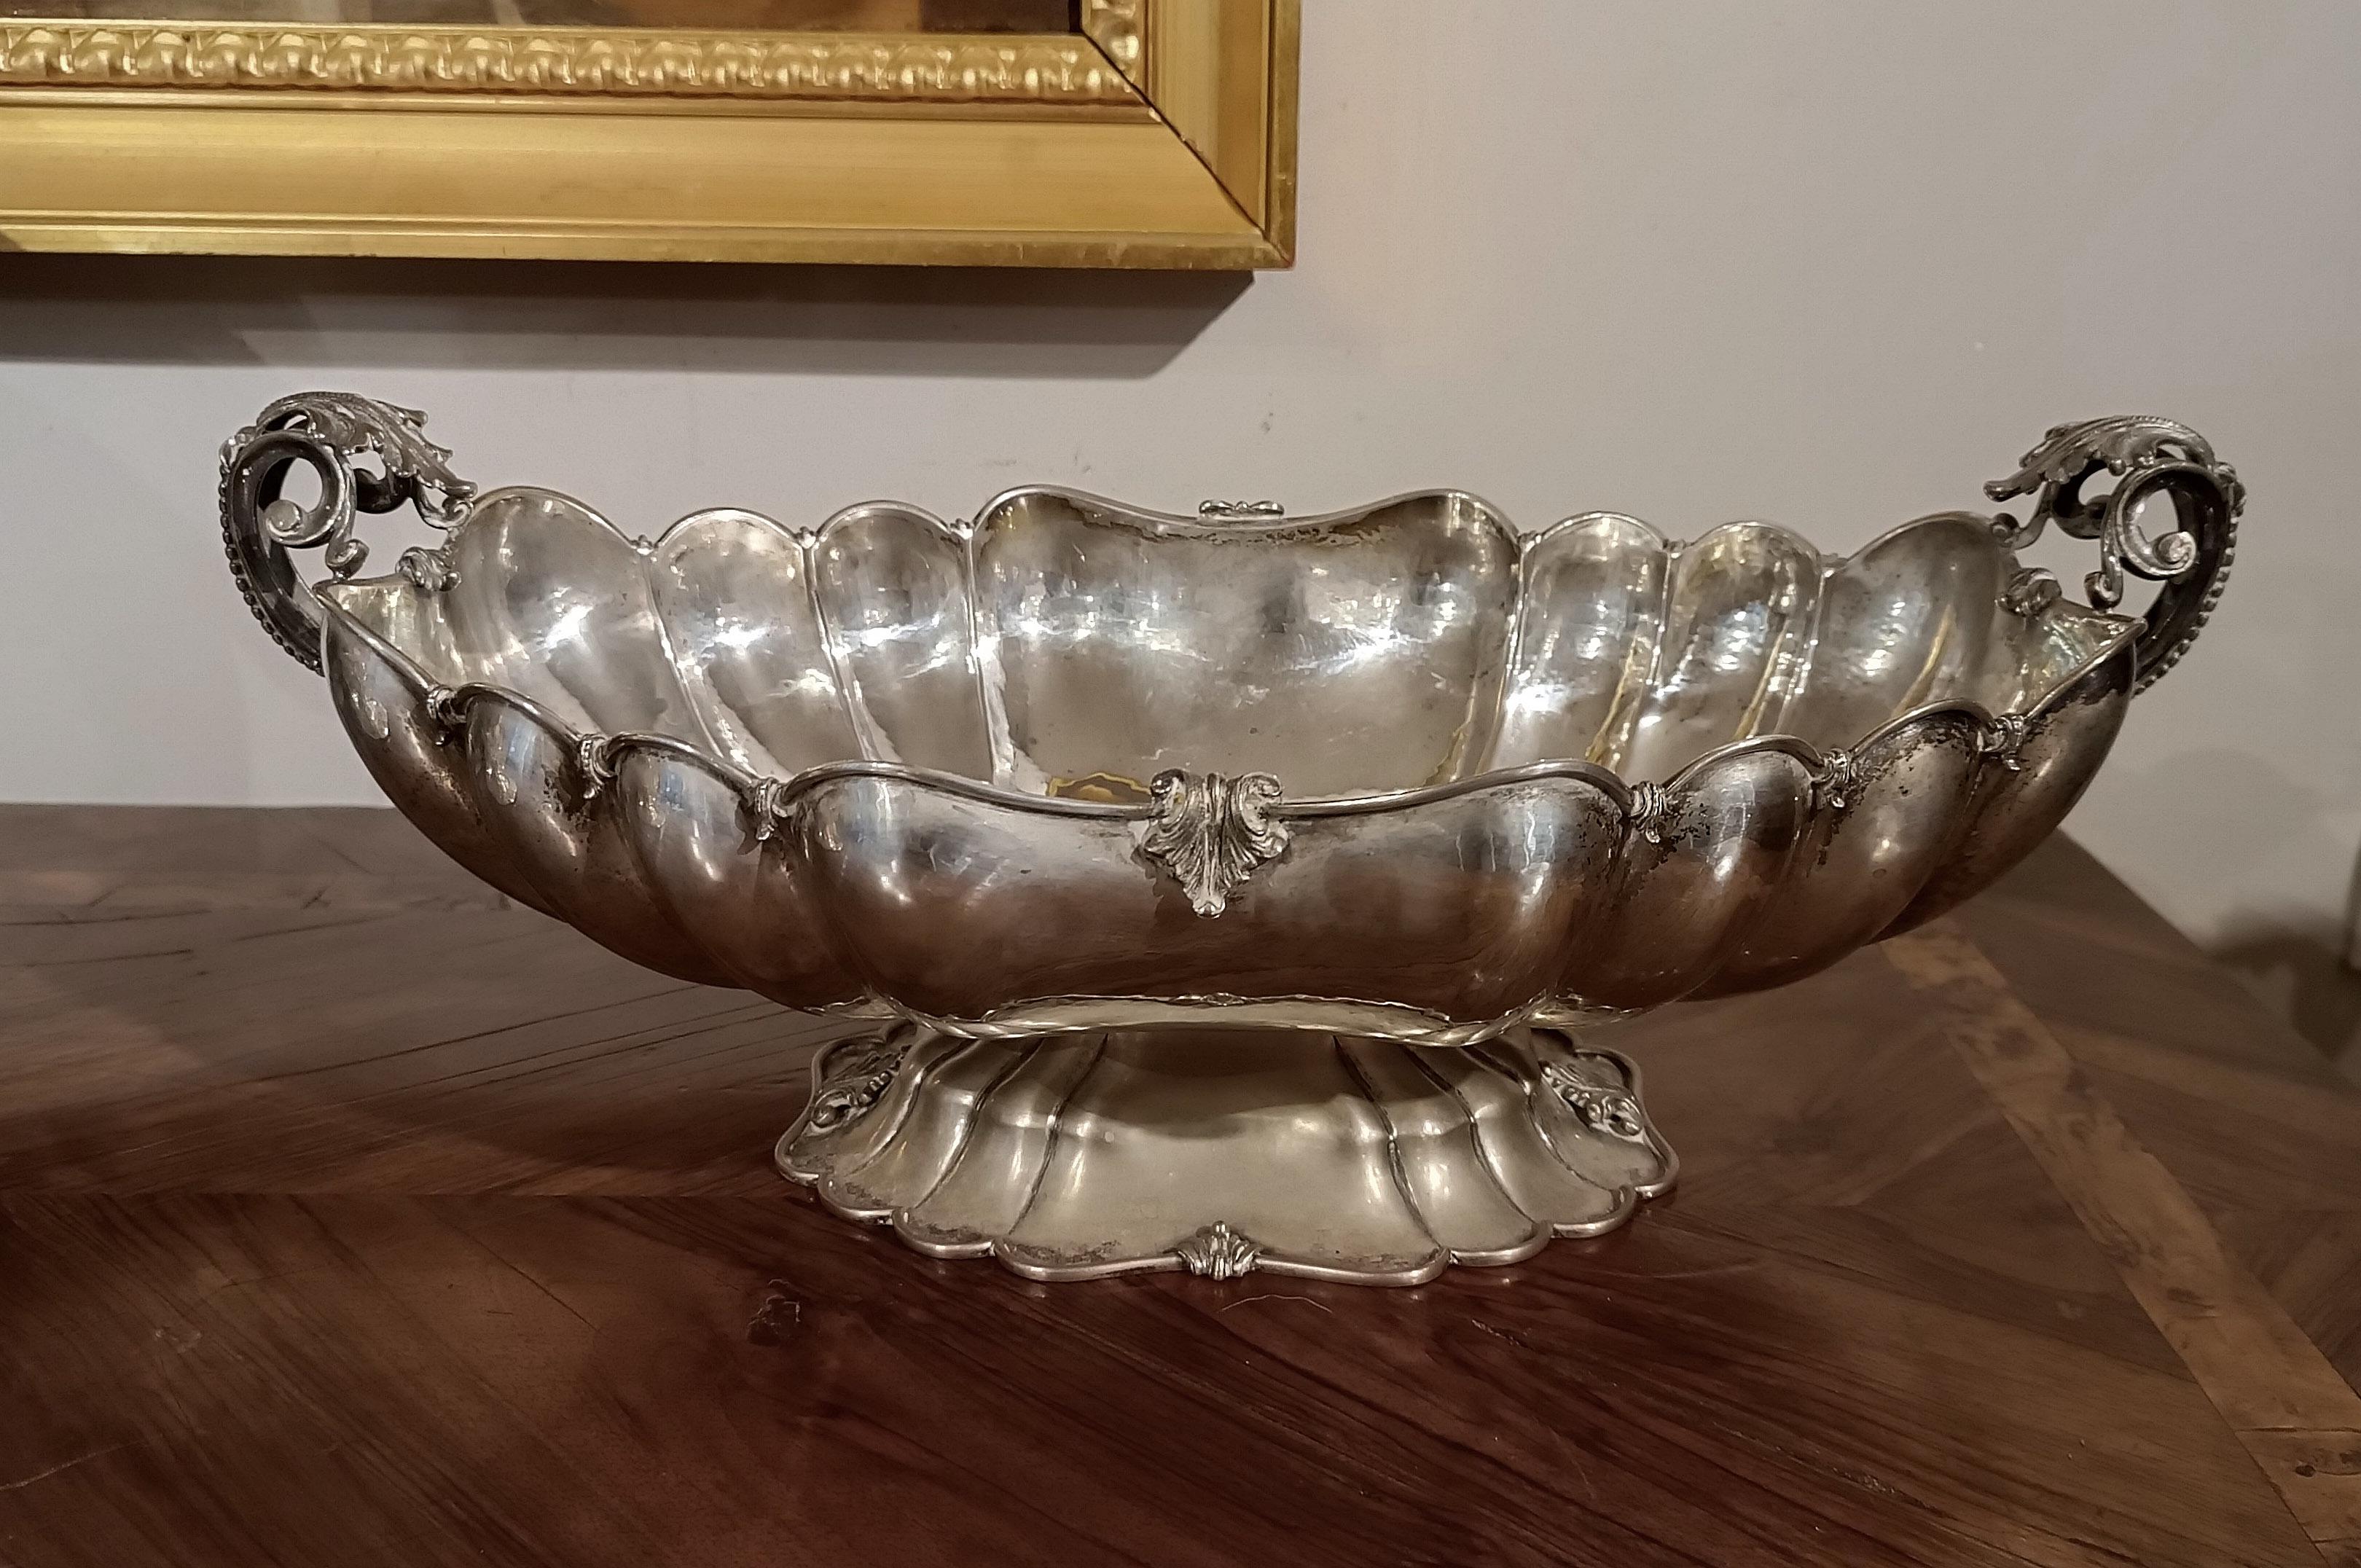 Beautiful centerpiece made entirely of solid silver, of fine Florentine workmanship, marked with the 